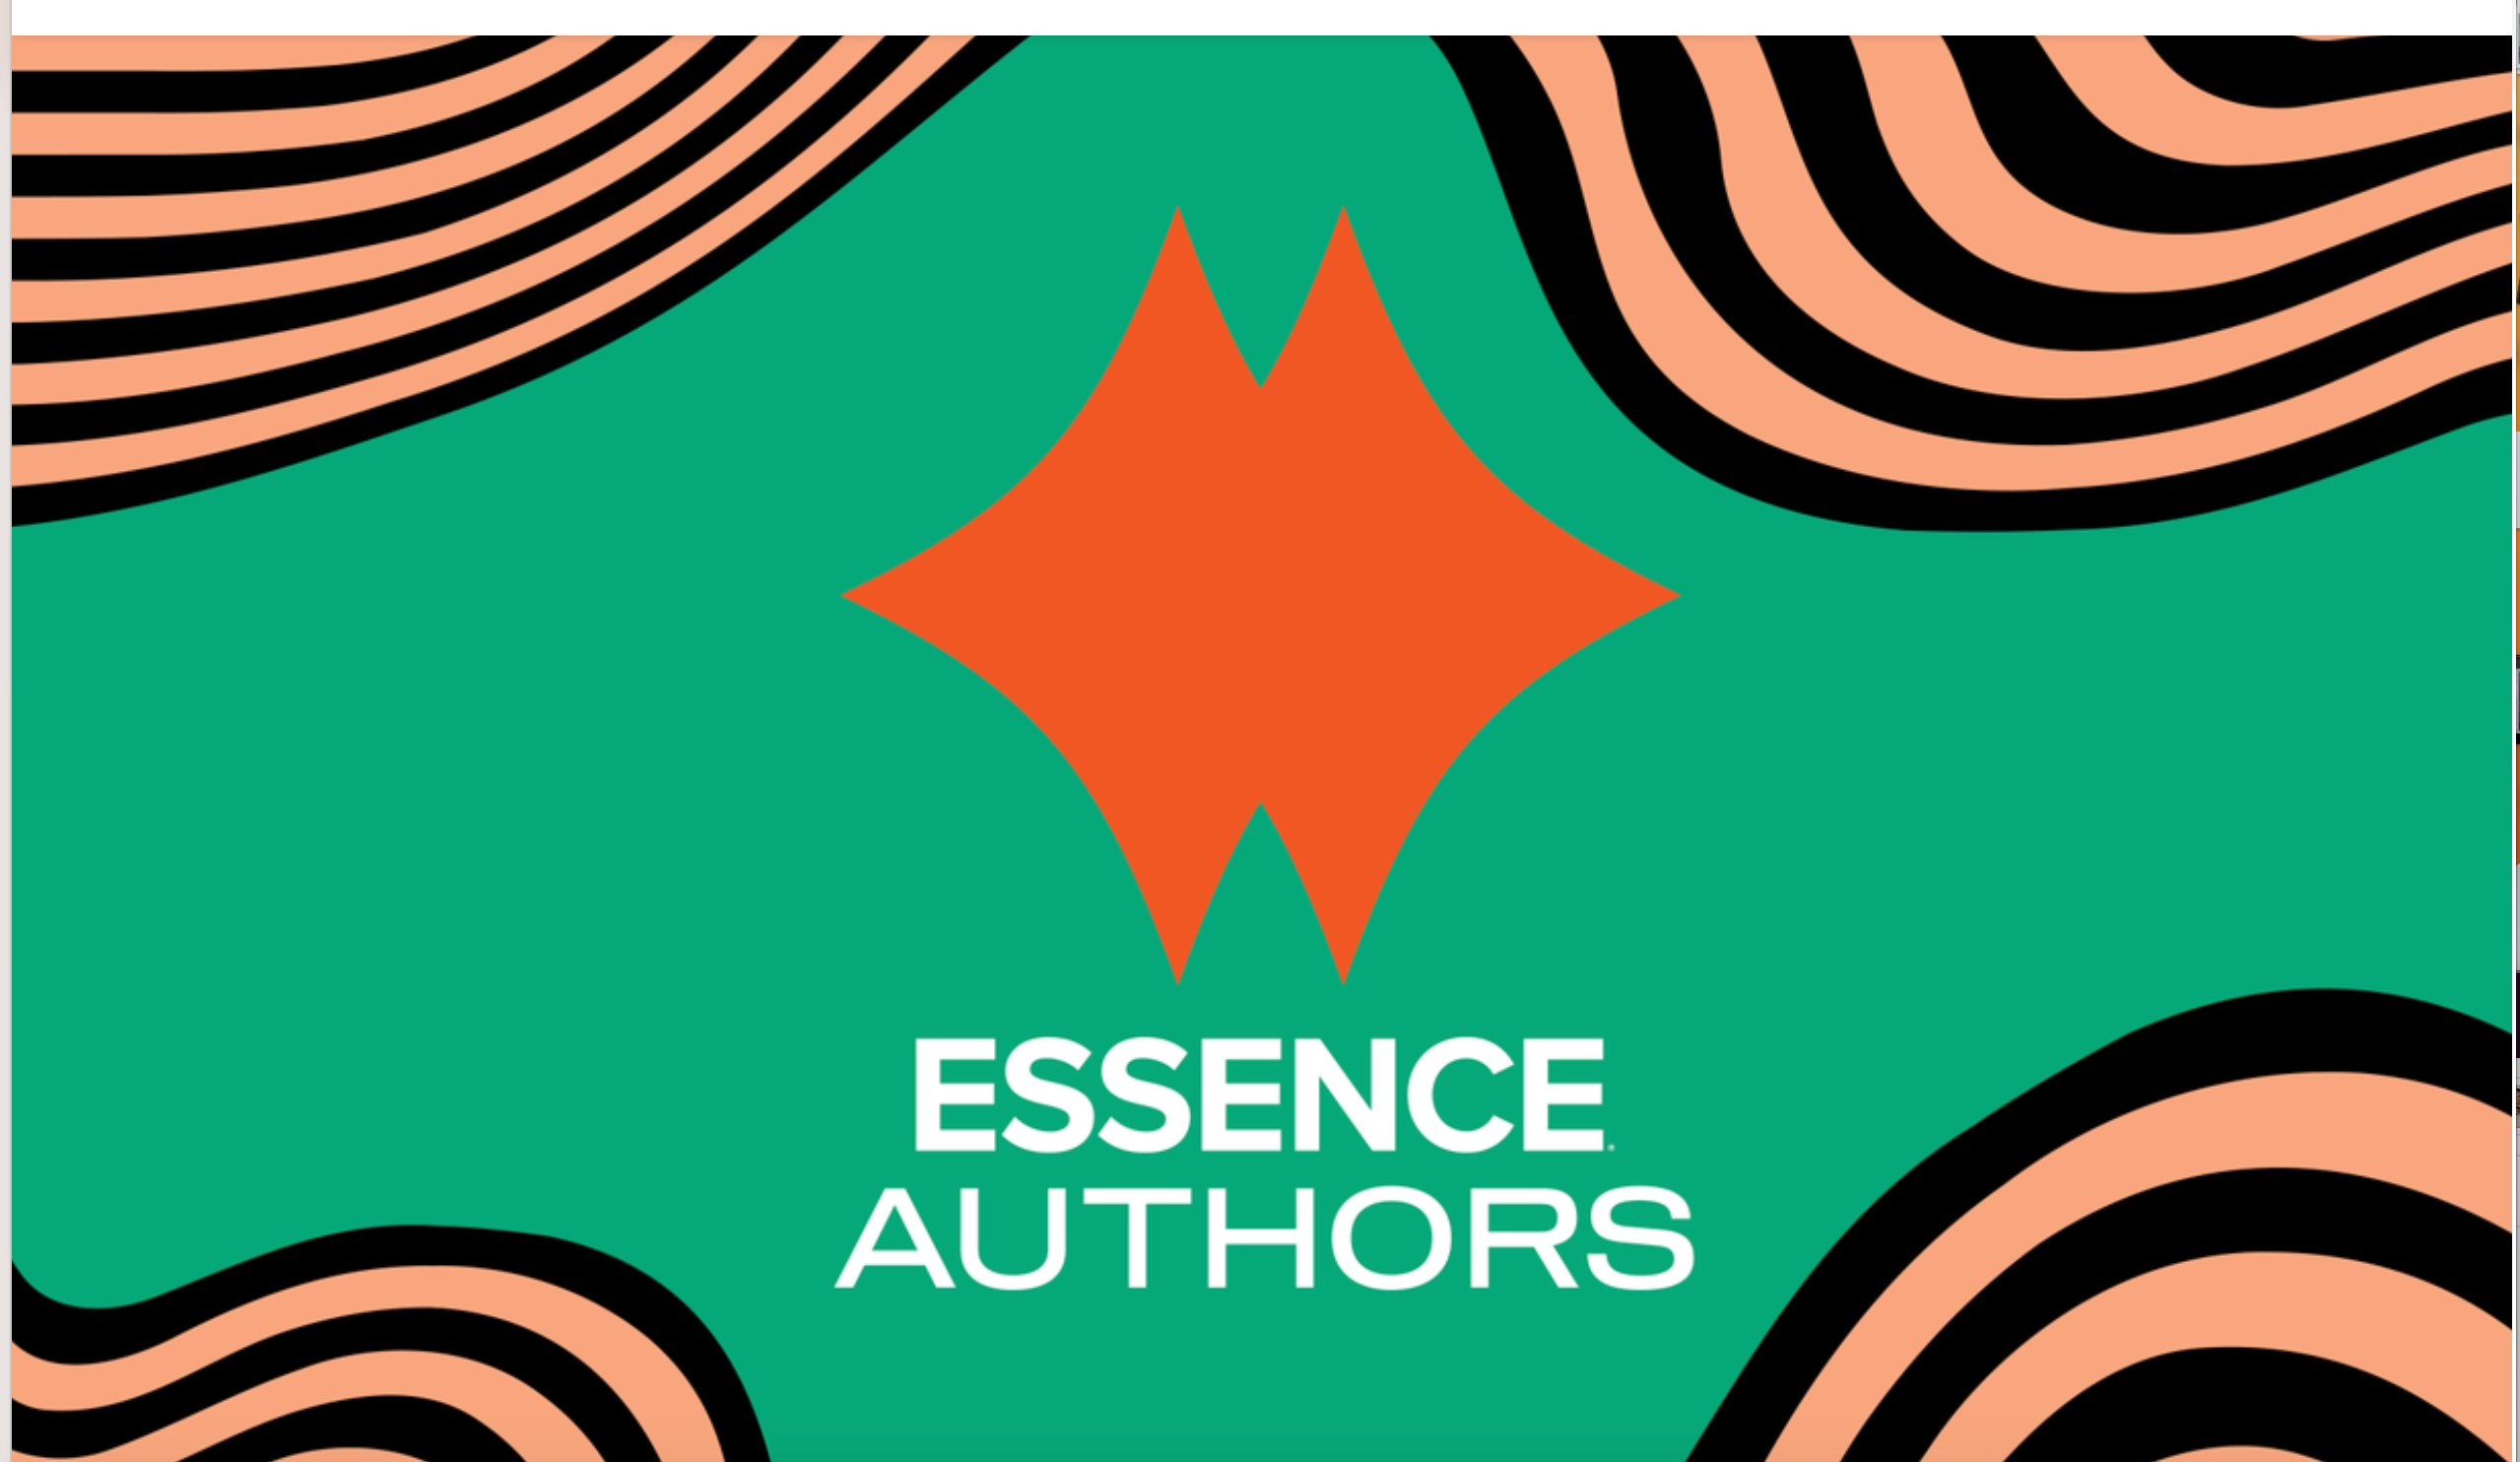 Calling All Book Lovers To The ESSENCE Authors™ Experience